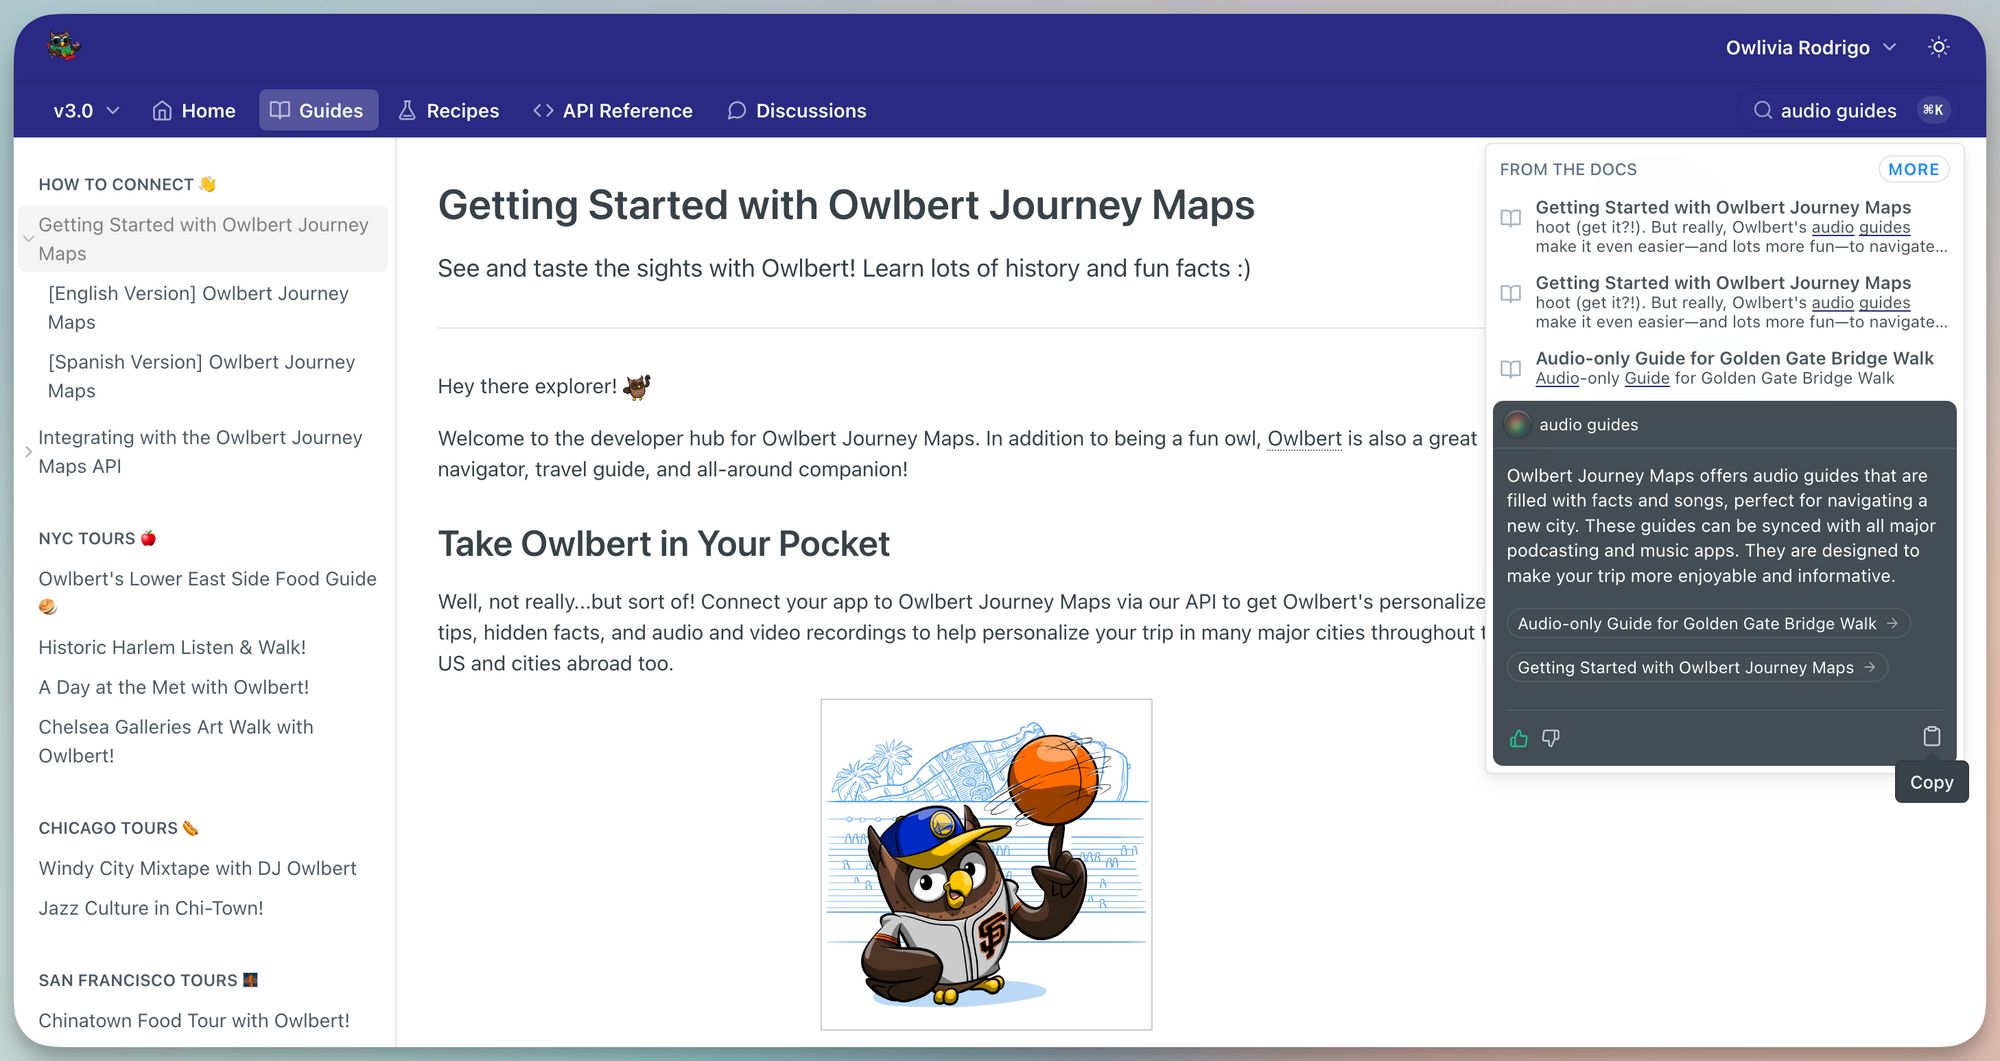 Take Your Docs to the Next Level With Owlbot AI